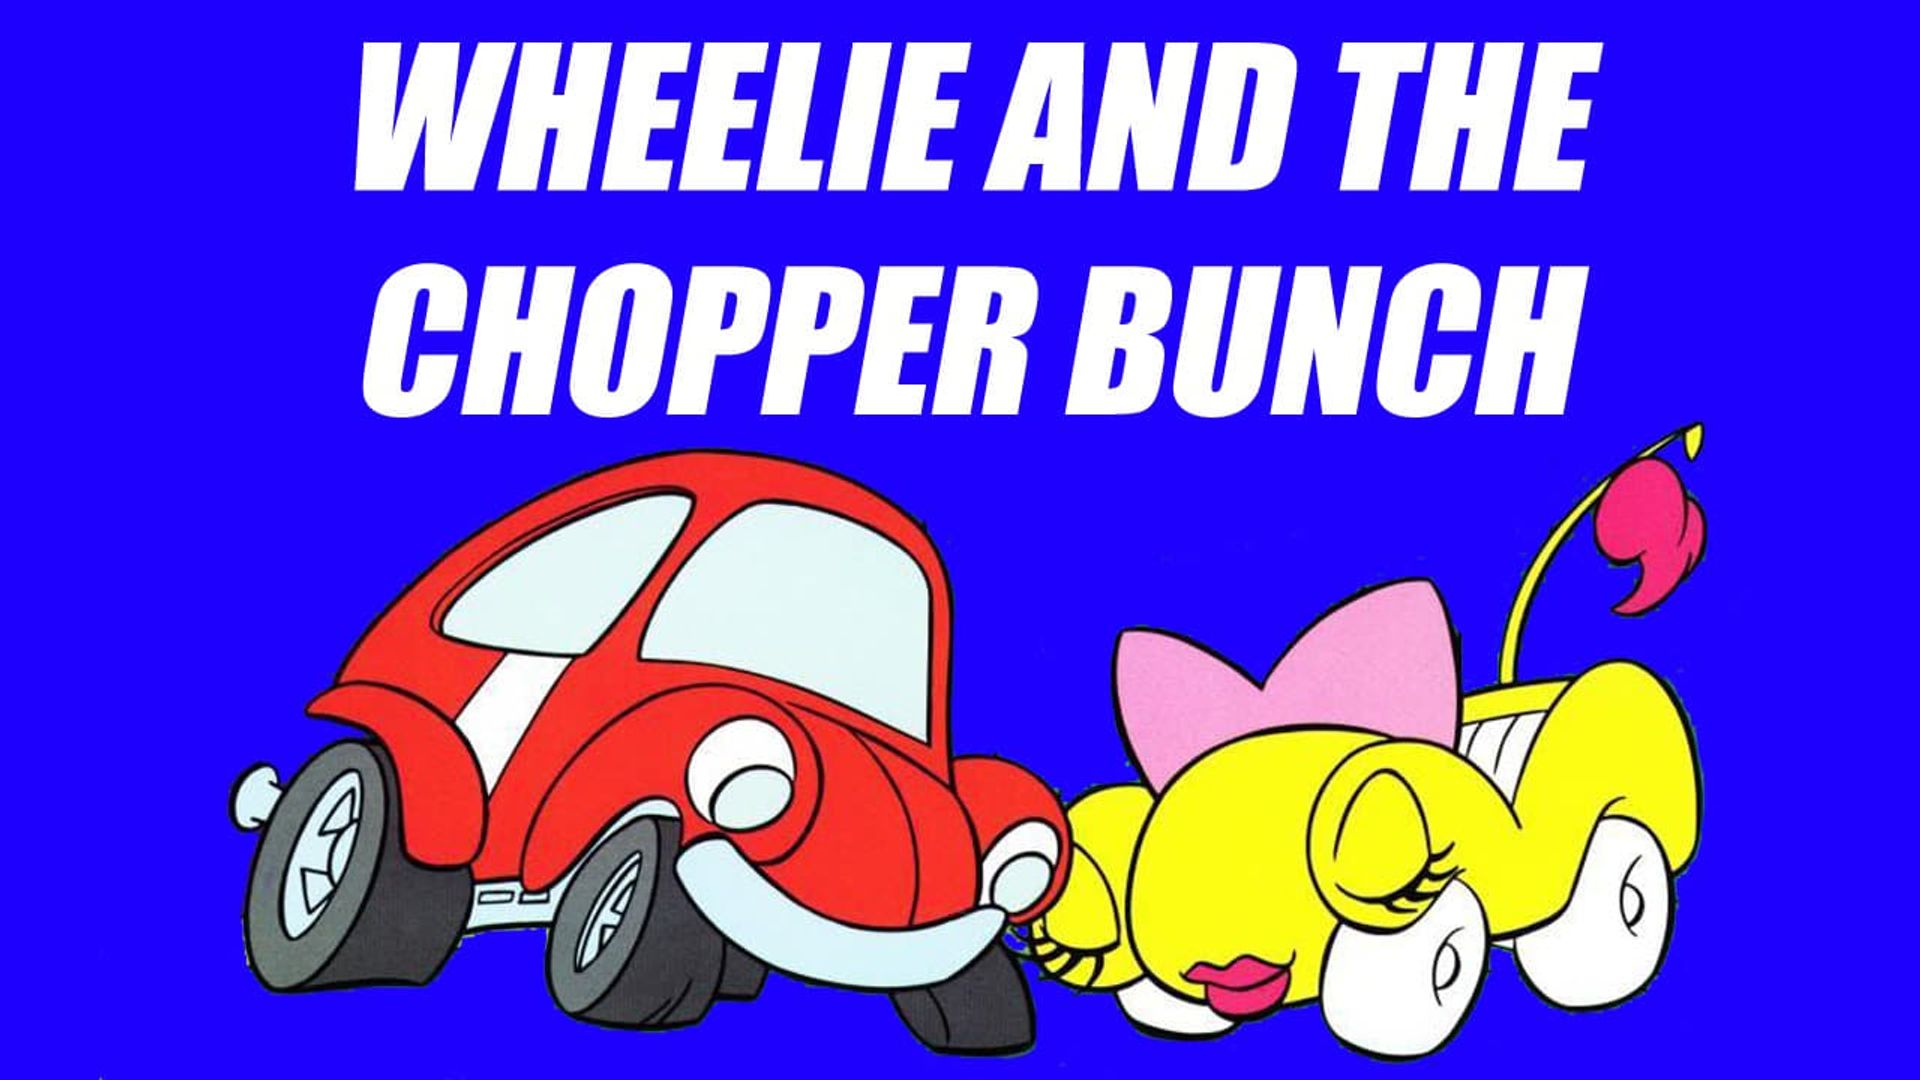 Wheelie and the Chopper Bunch background